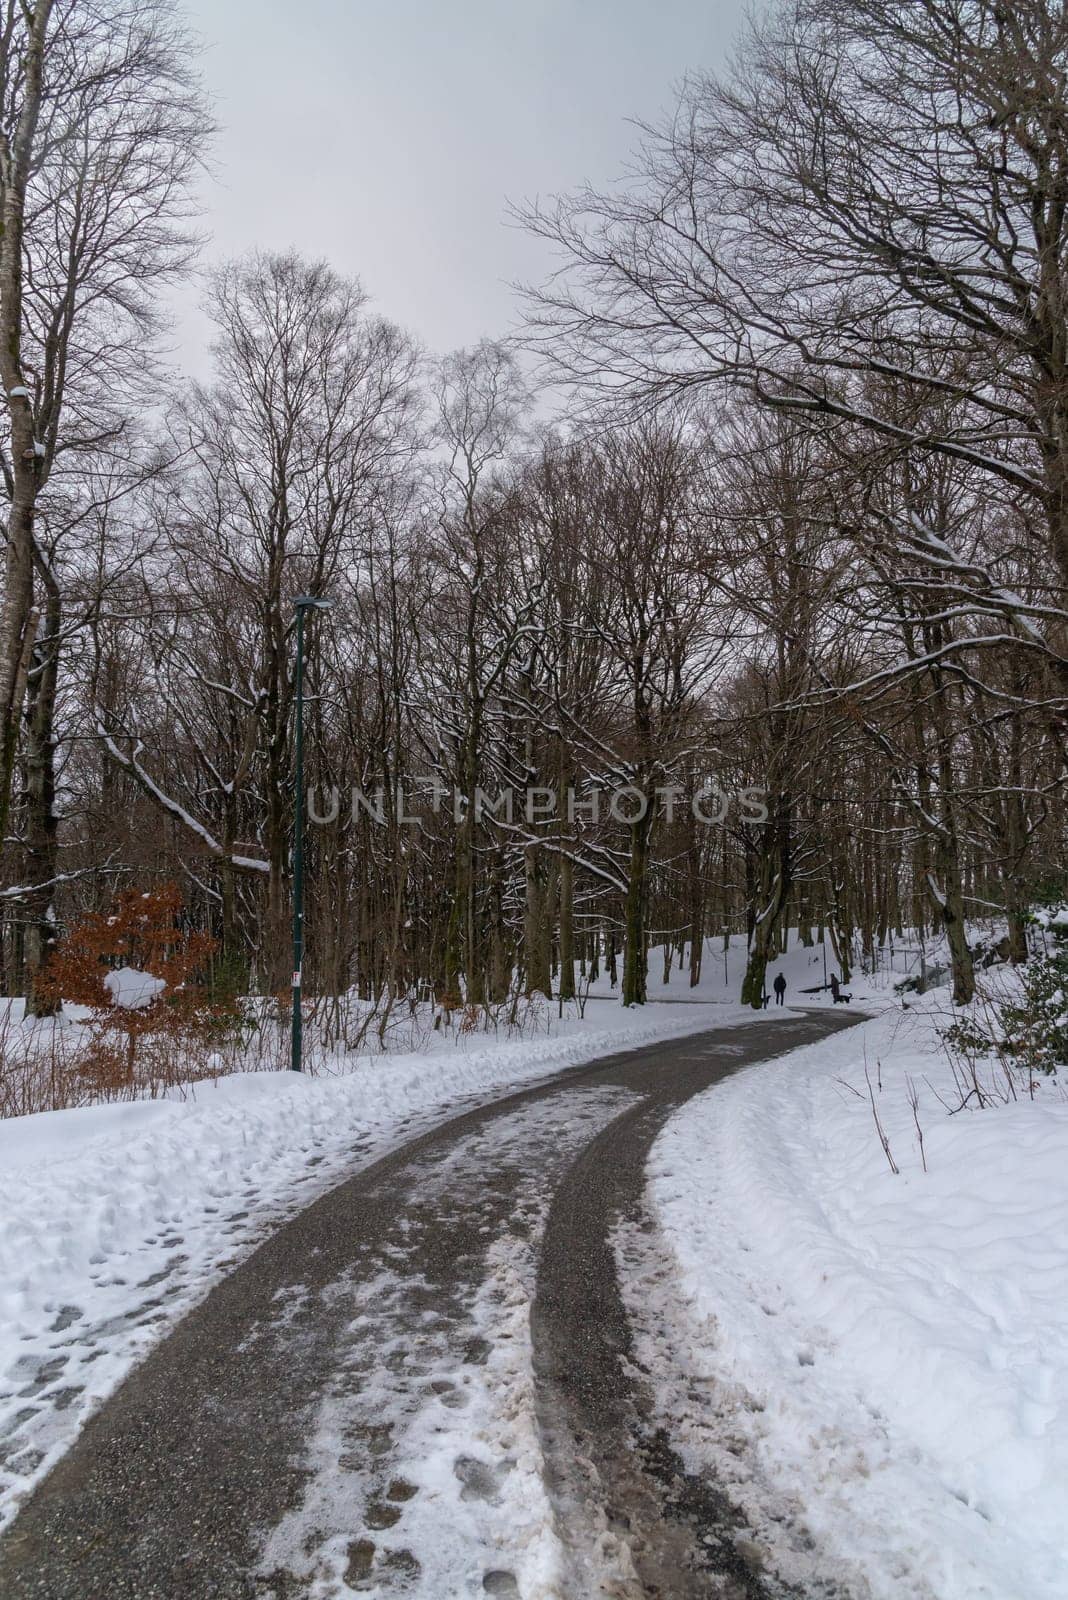 Snow-Covered Path through a Forested Park by JavierdelCanto